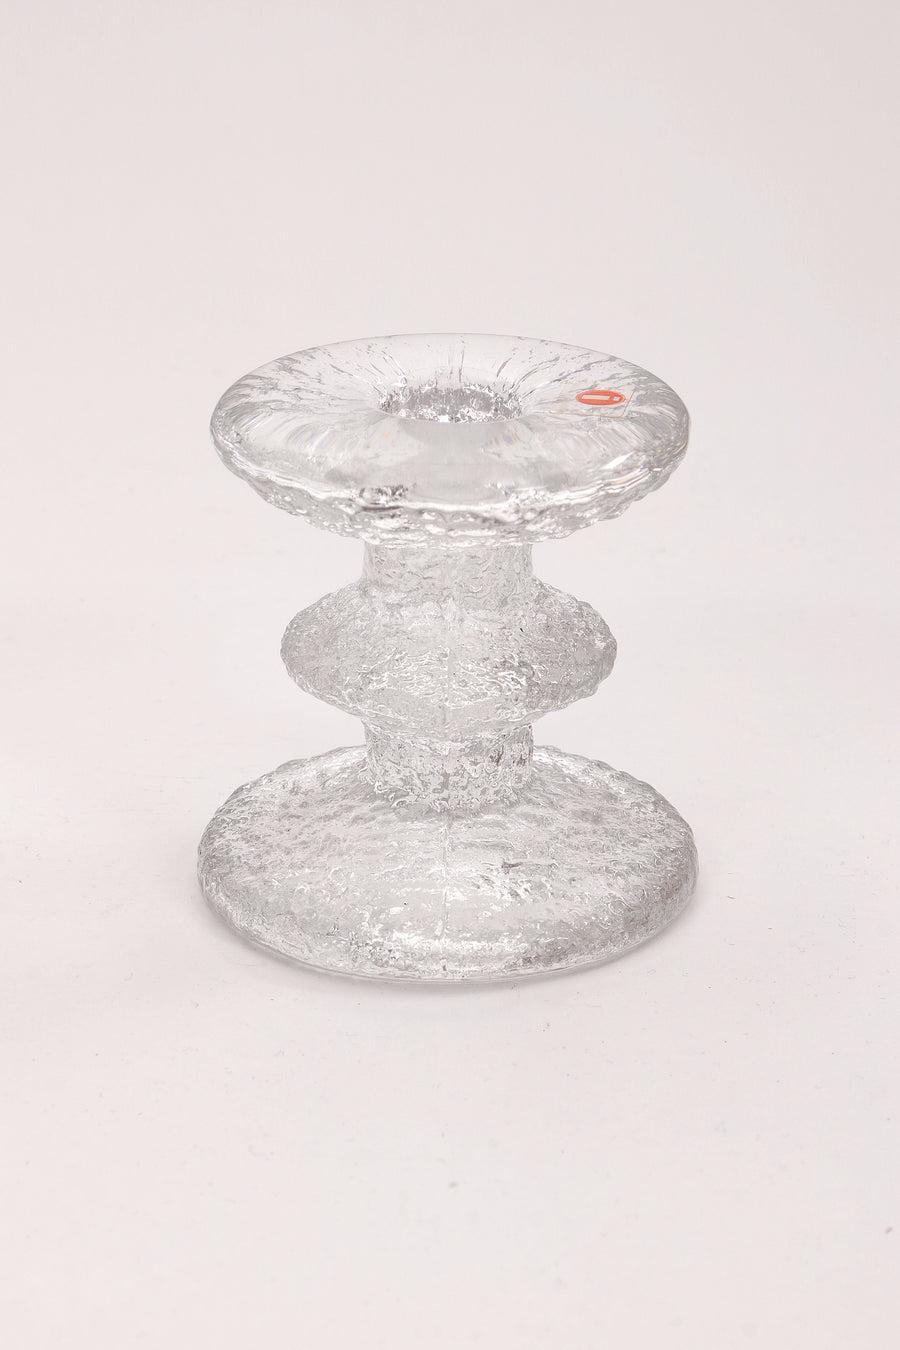  Glass Candlesticks Design by Staffan Gellerstedt, 1960s

Vintage iittala glass candlestick.Scandinavia: signed Iittala festivo candlestick with multiple rings design by Timo Sarpaneva from 1966. 
Timo Sarpaneva (1926-2006) was one of the greatest